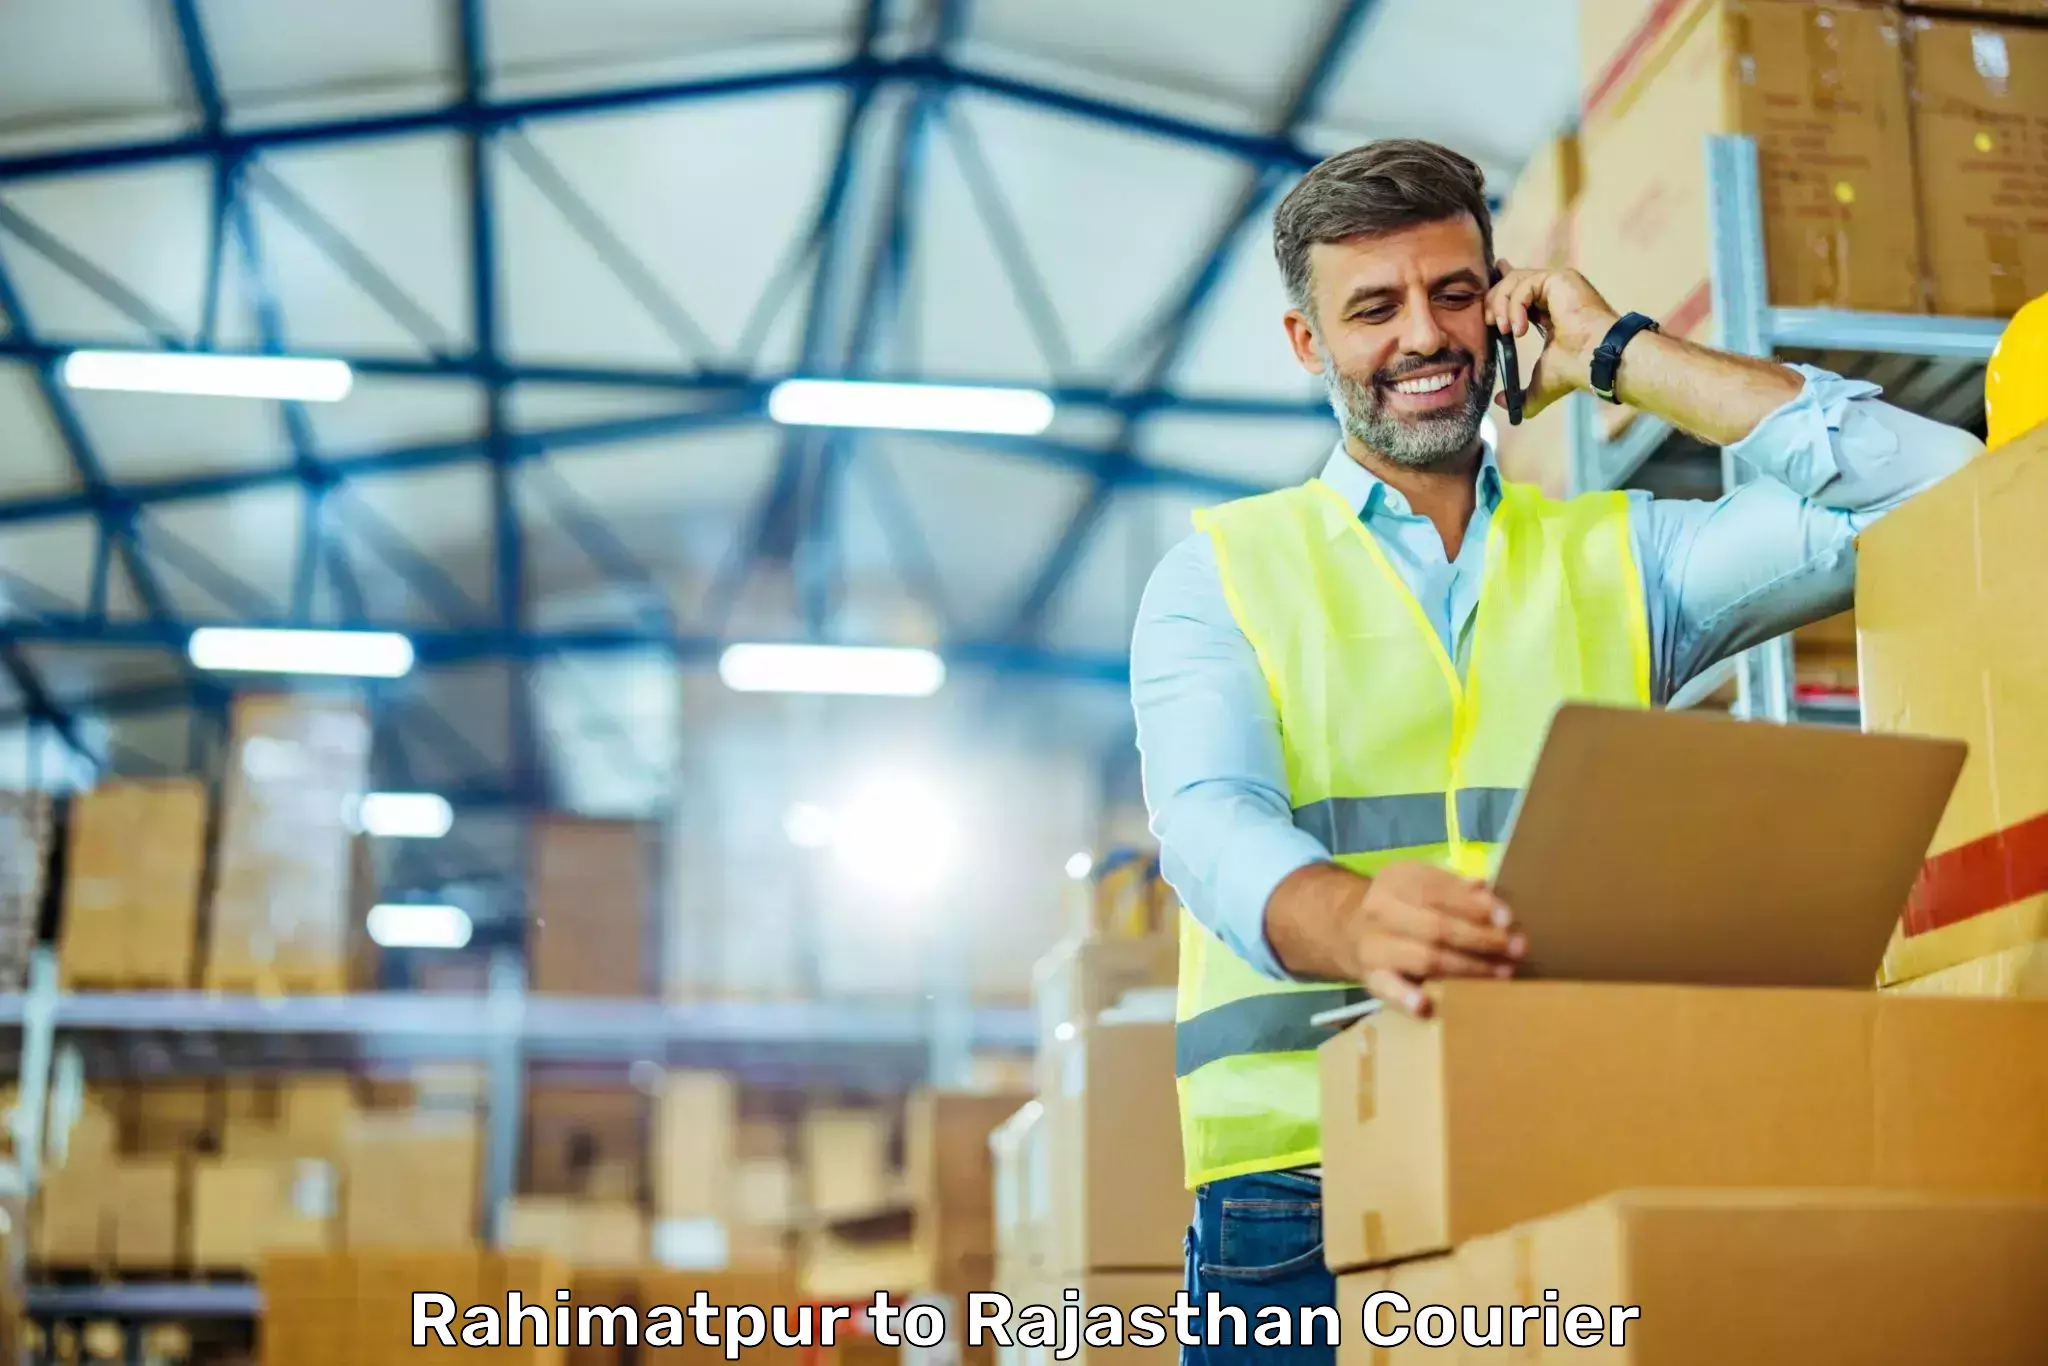 International courier networks Rahimatpur to Rajasthan